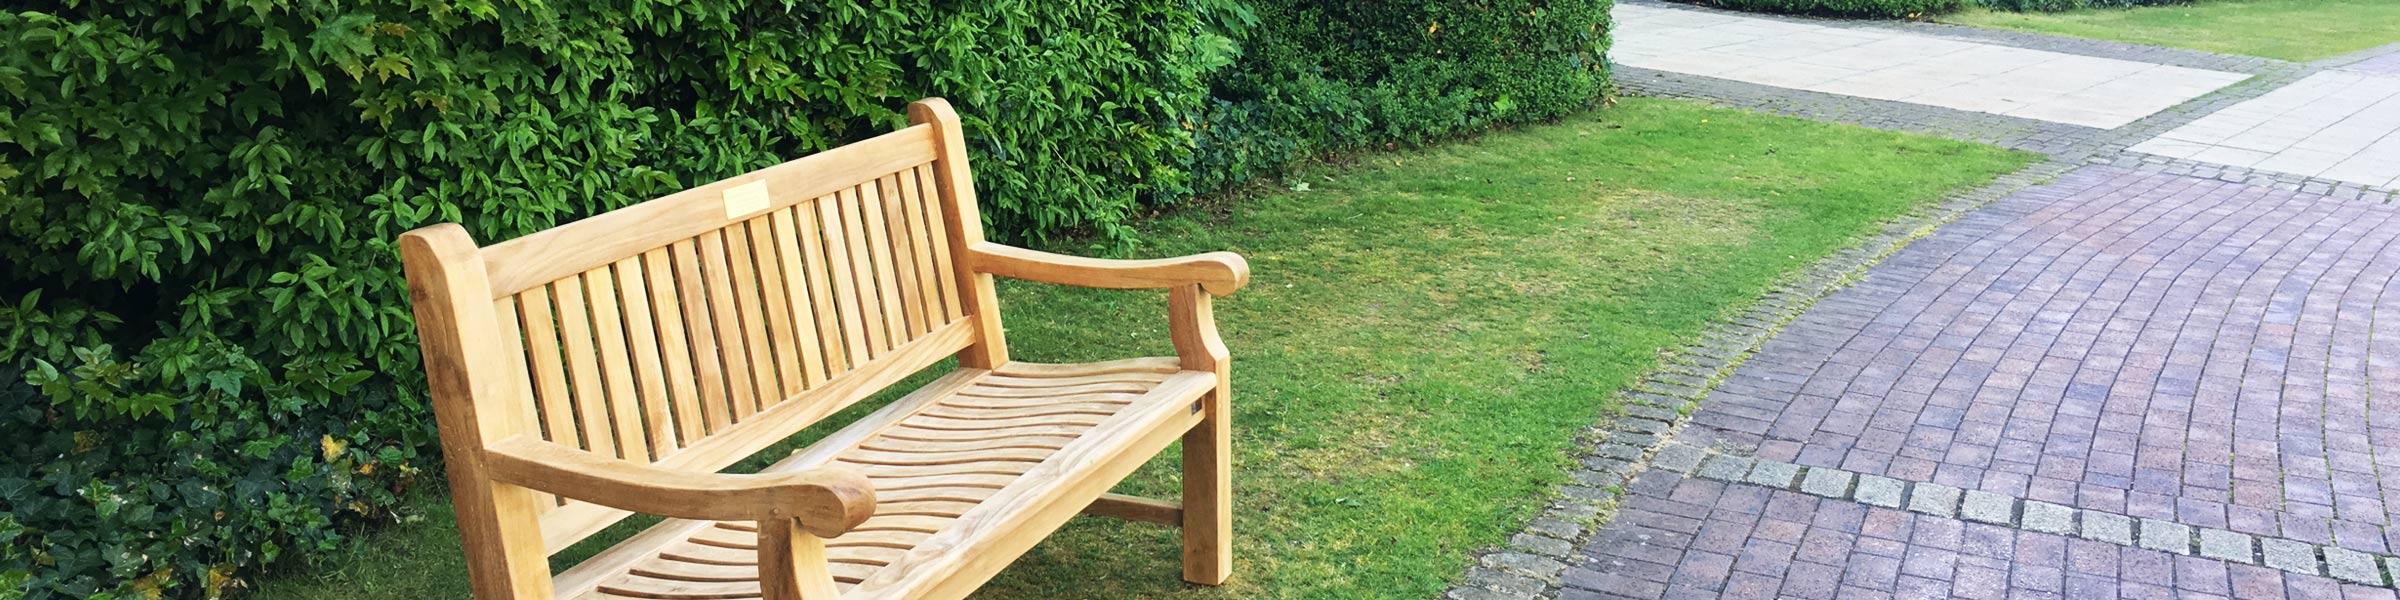 Outdoor Benches for Sports Clubs & Grounds